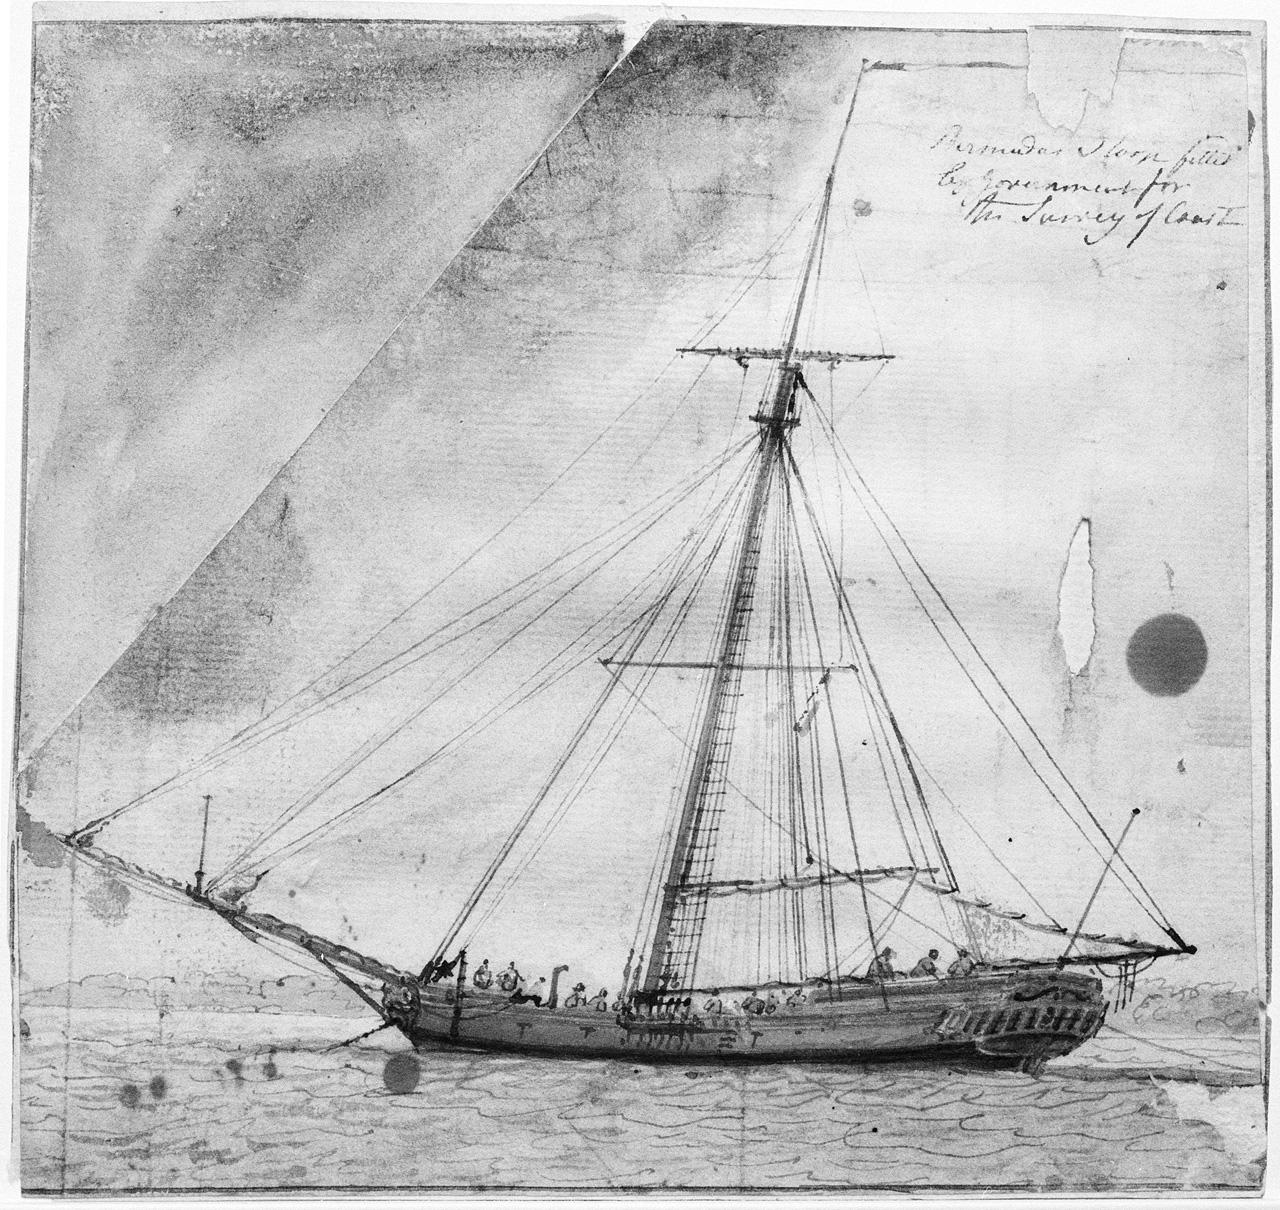 'Bermuda sloop fitted by Government for the survey of coast’